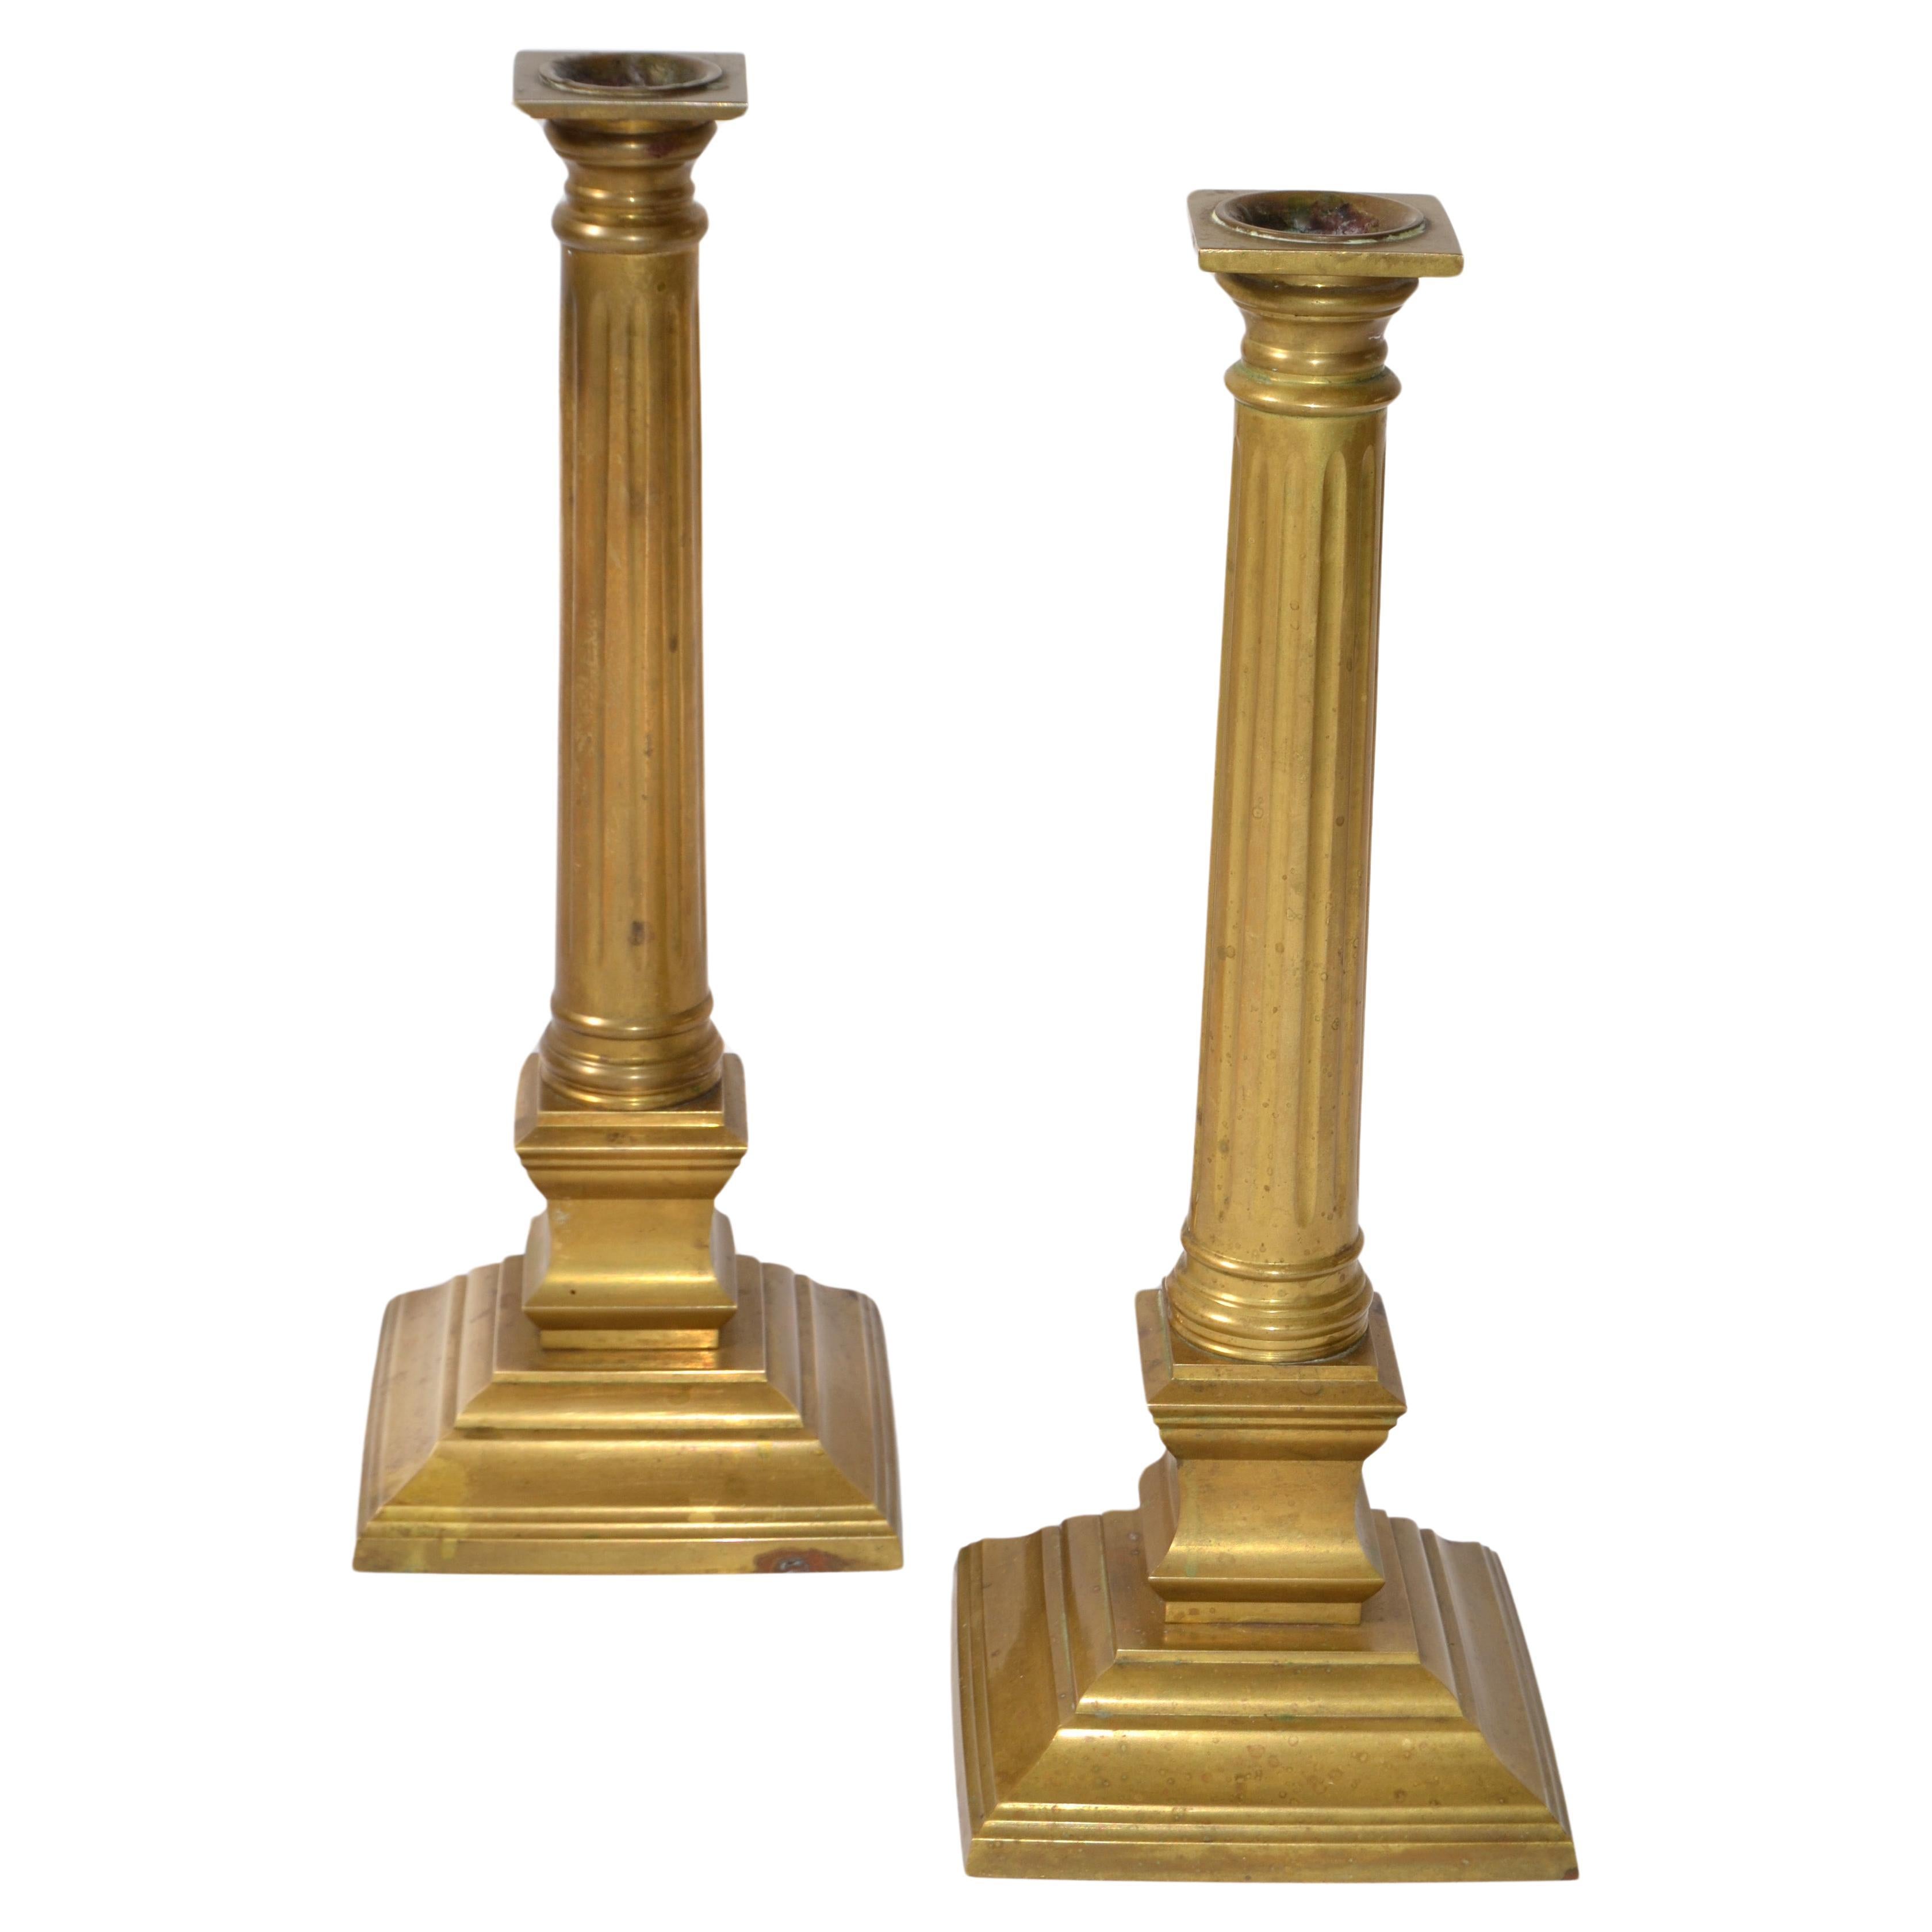 A stunning pair of vintage Hollywood Regency Brass Column candlesticks. Handmade and Hand designed by the iconic Maitland Smith, Hong Kong and tagged on the bottom. 
Great for Your Fireplace Mantel, Dresser or Console Table.